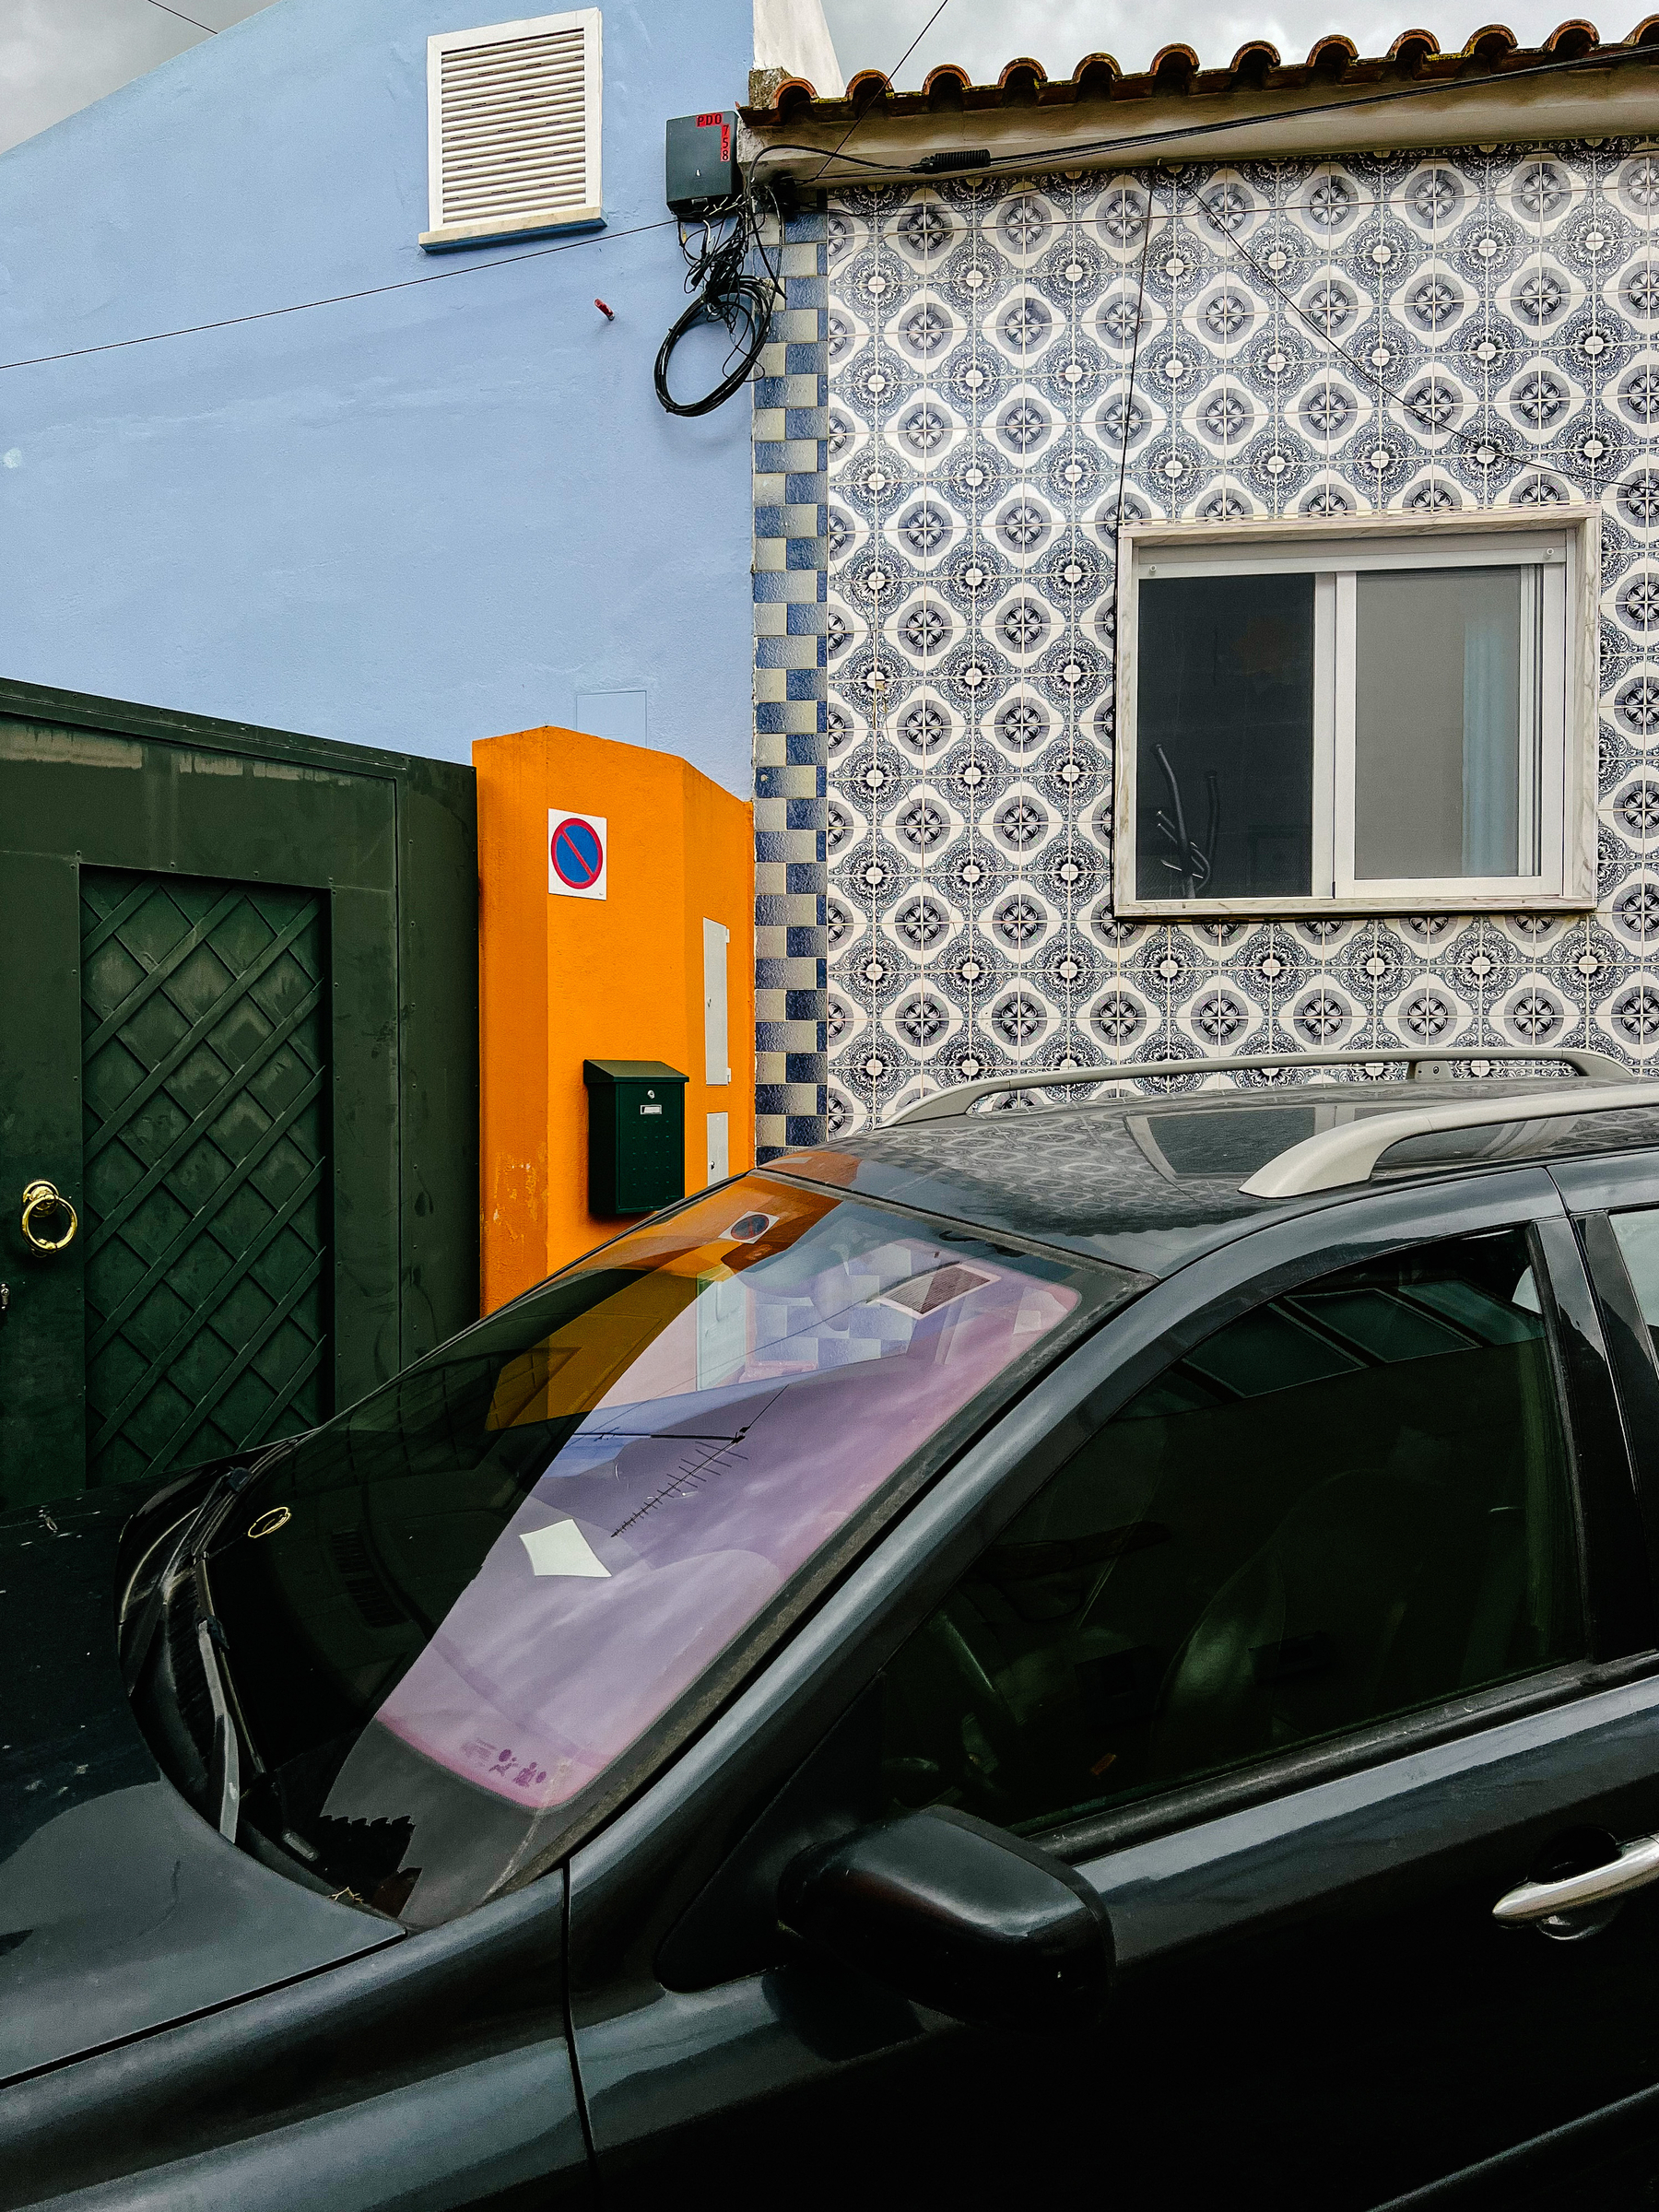 A car is parked outside a crazy looking corner, with a tiled house, with a green and orange door. 